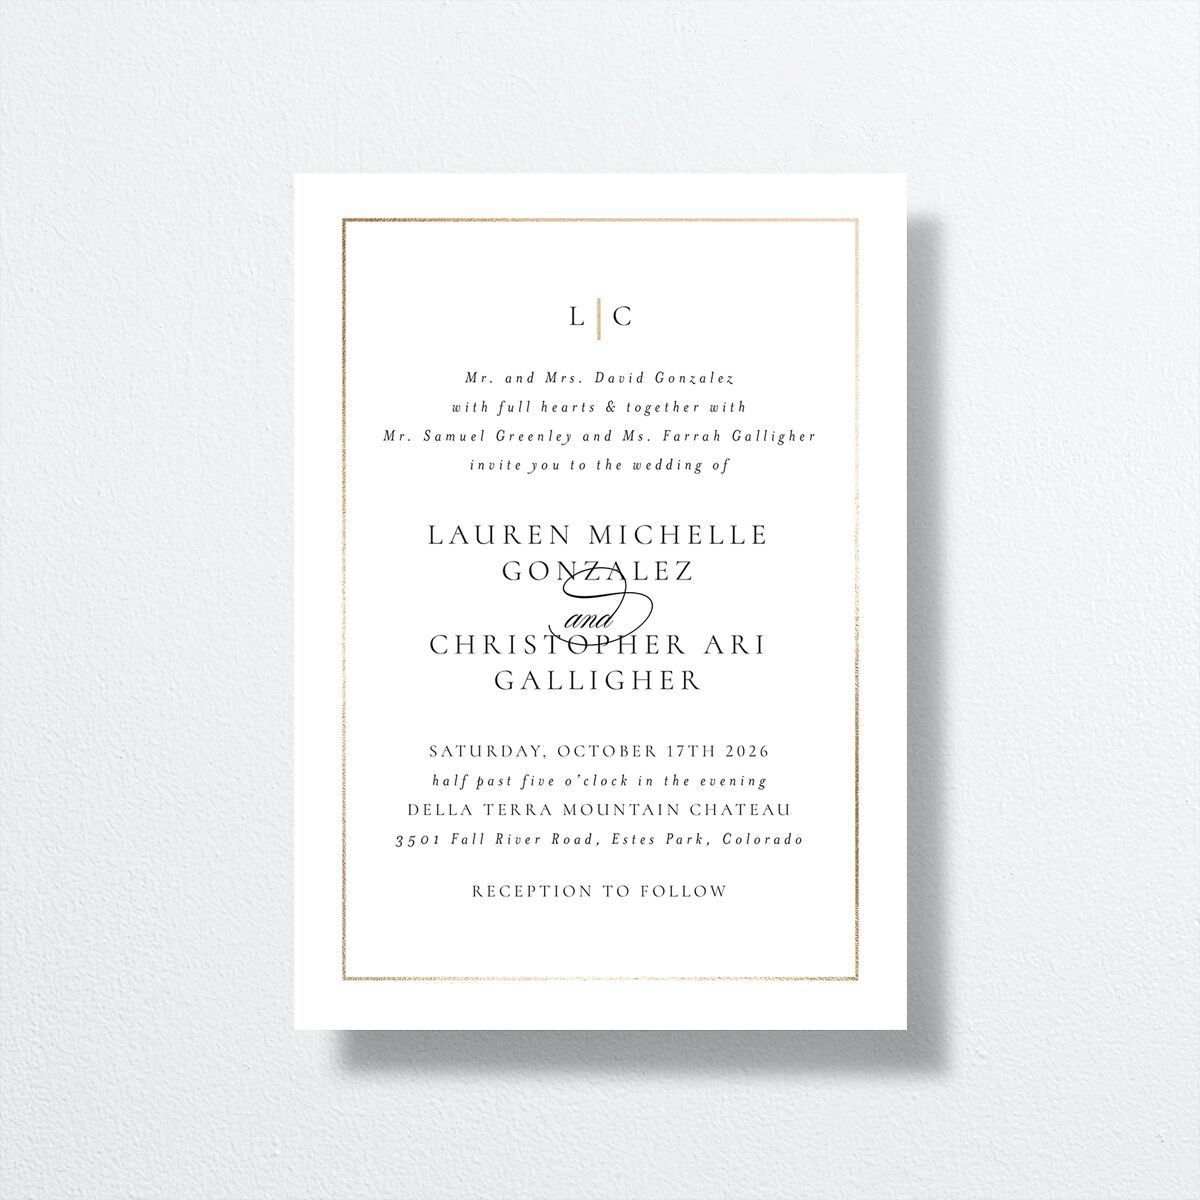 Timeless Frame Wedding Invitations front in White